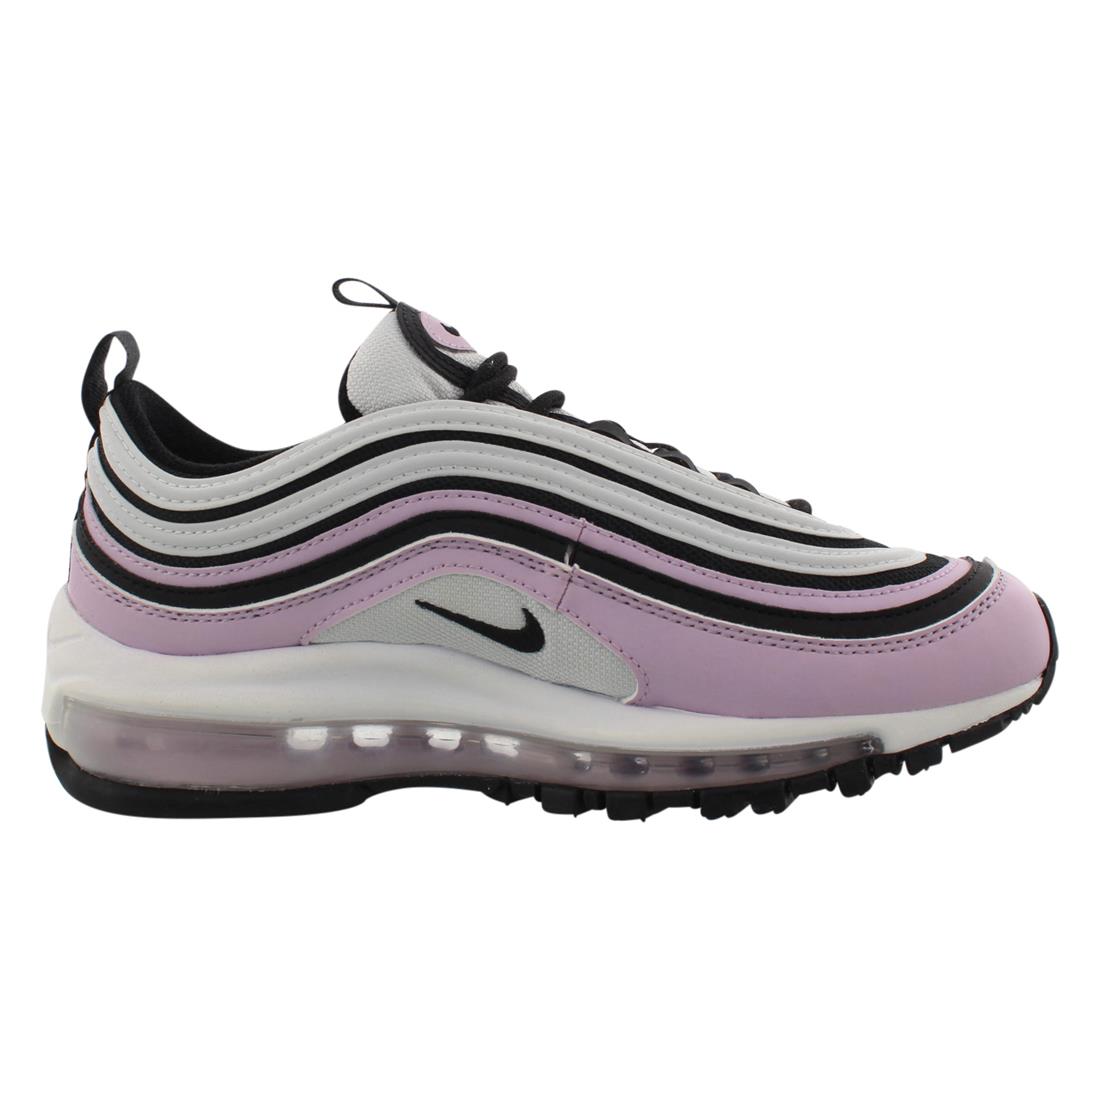 Nike shoes  - Iced Lilac/Black/Photon Dust, Main: Pink 5